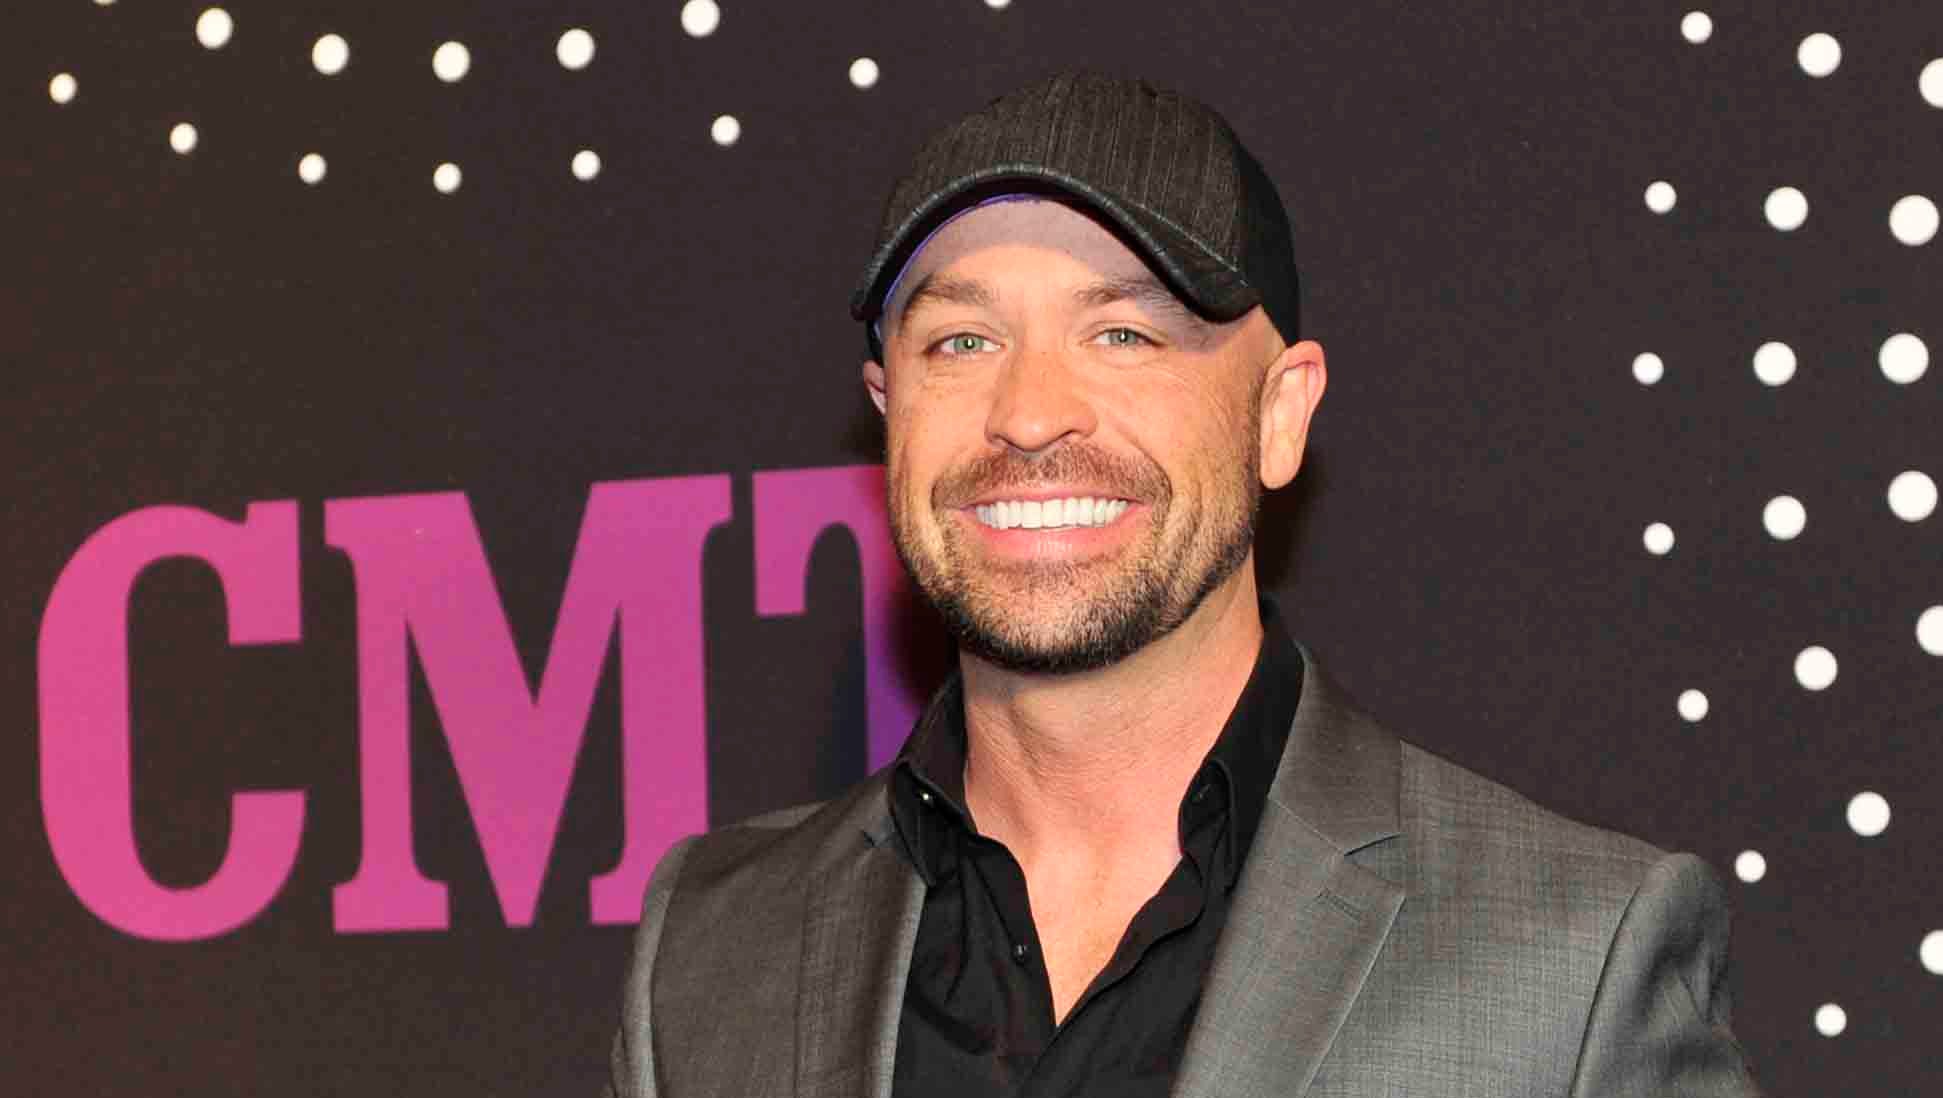 Cmt S Cody Alan Explains Decision To Come Out As Gay